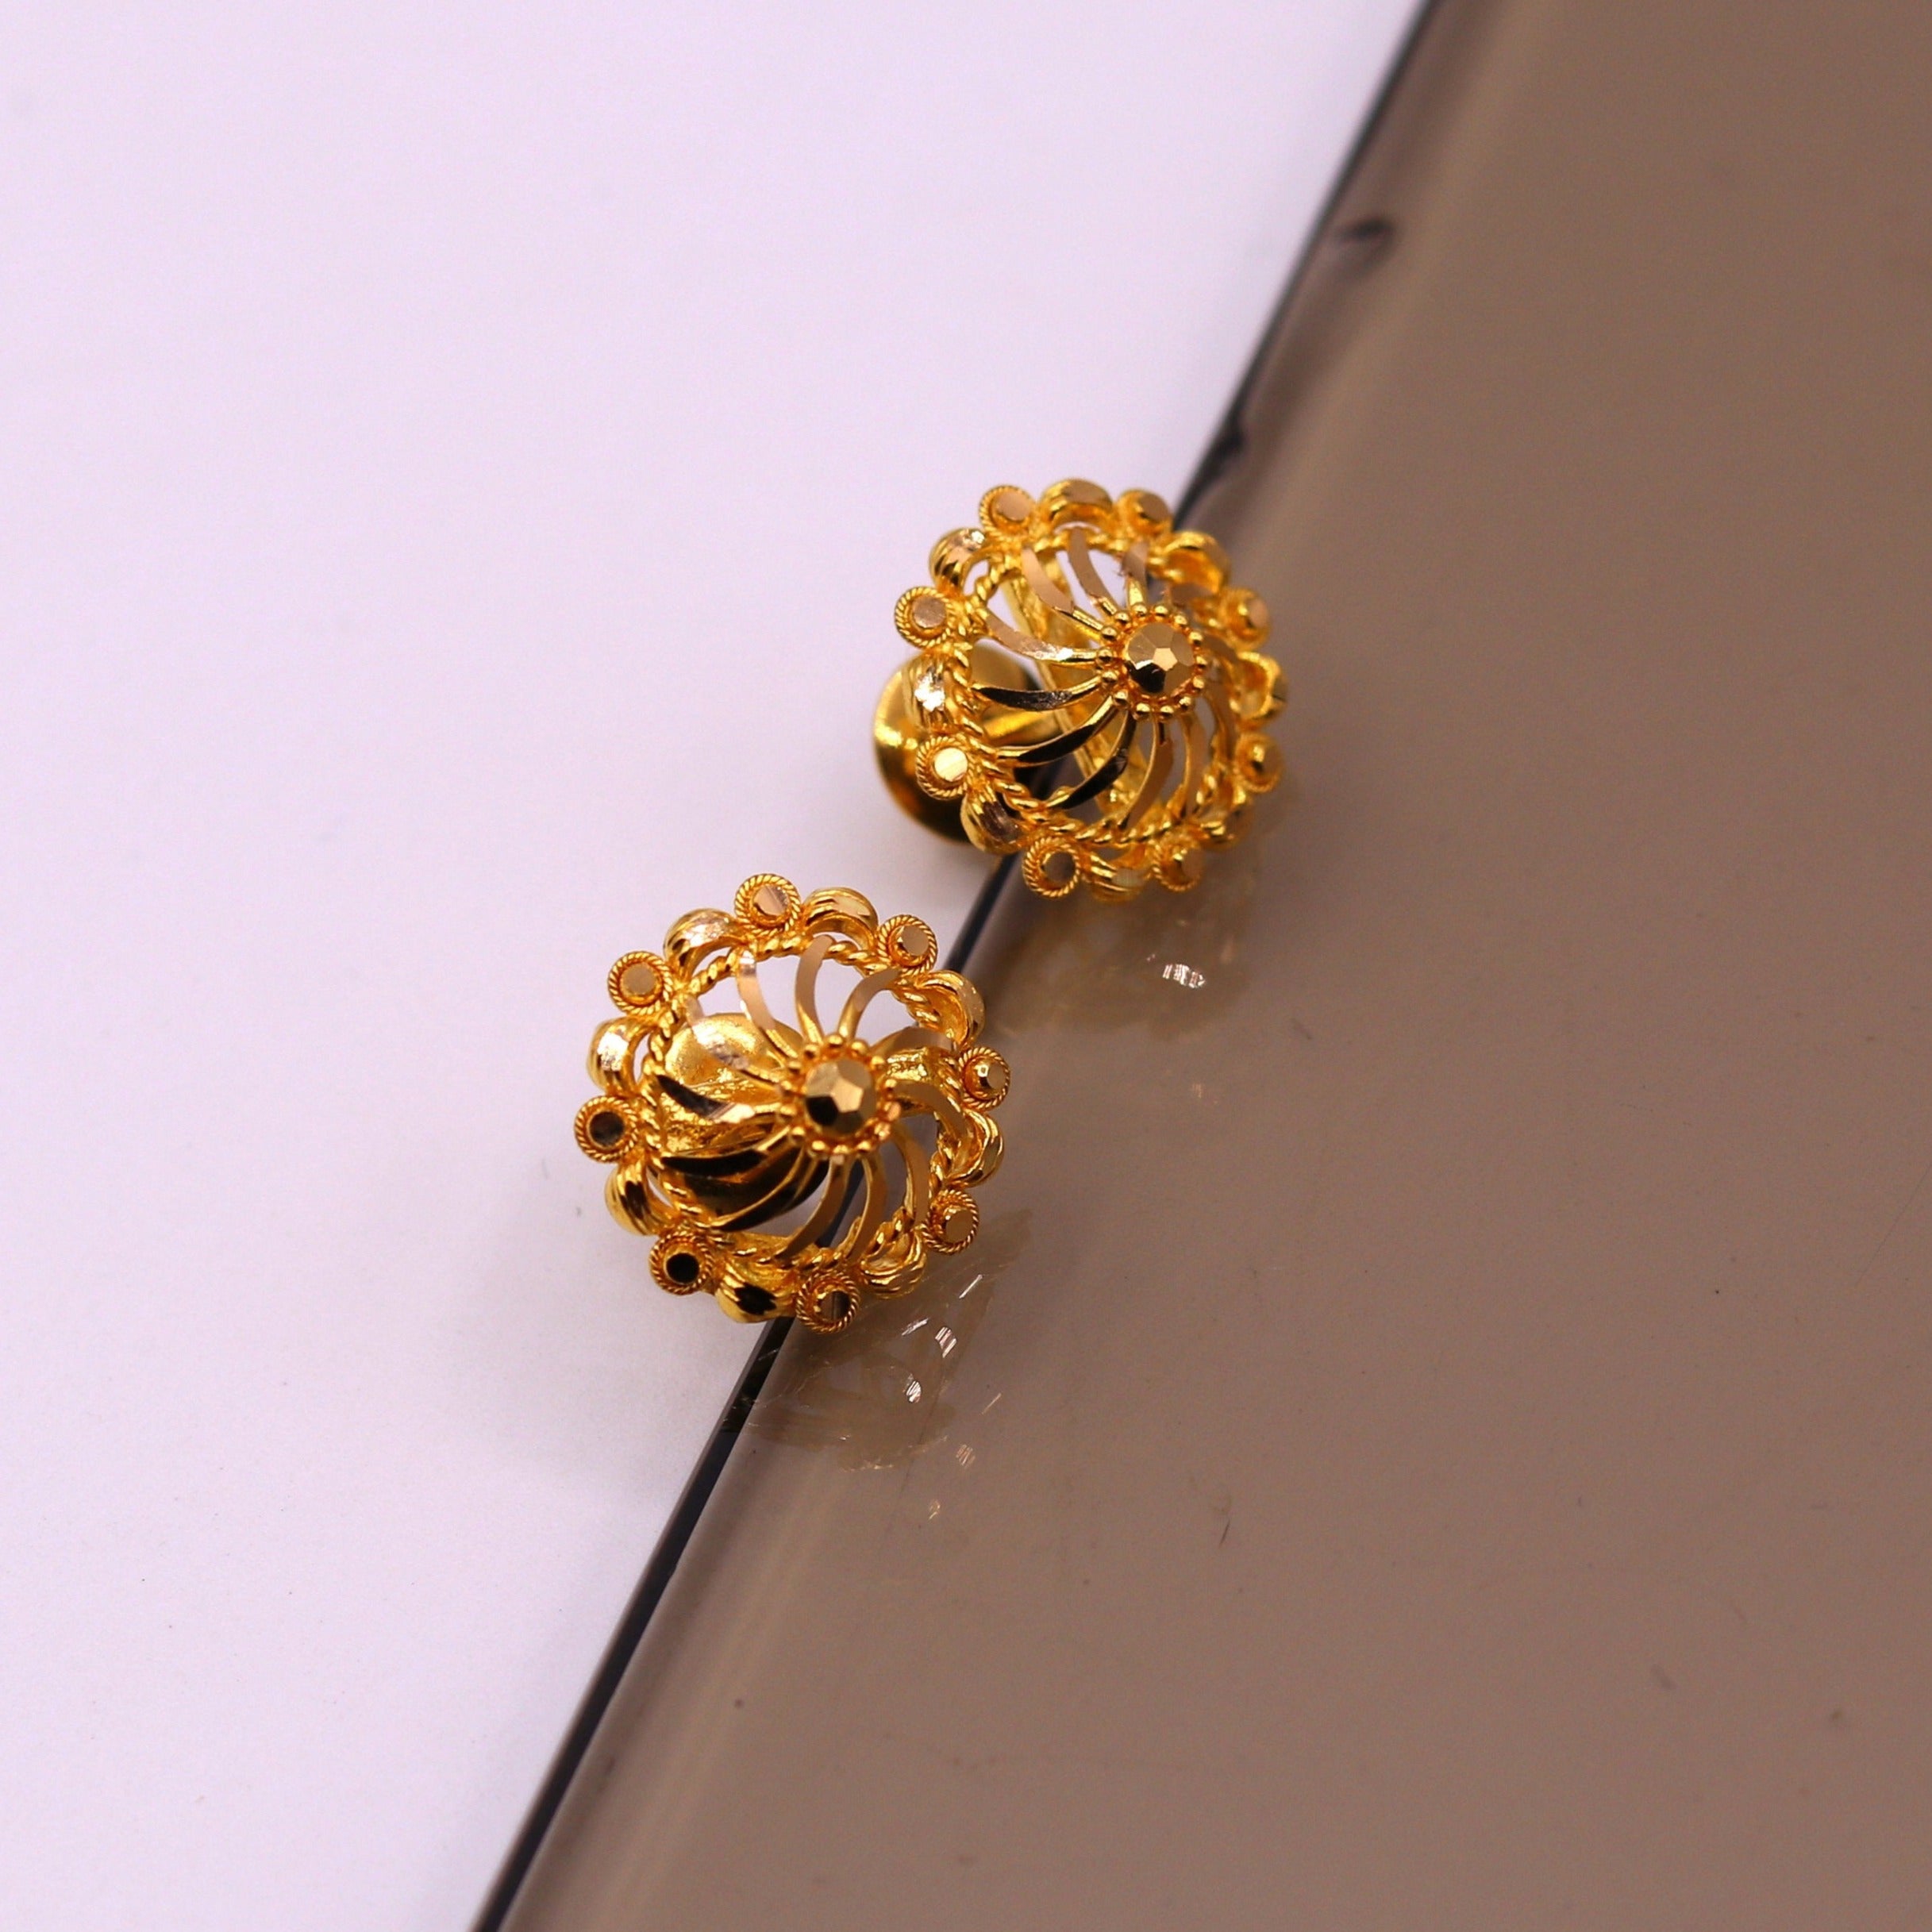 Buy quality 22 k yellow gold handmade antique stylish stud earrings in  Ahmedabad